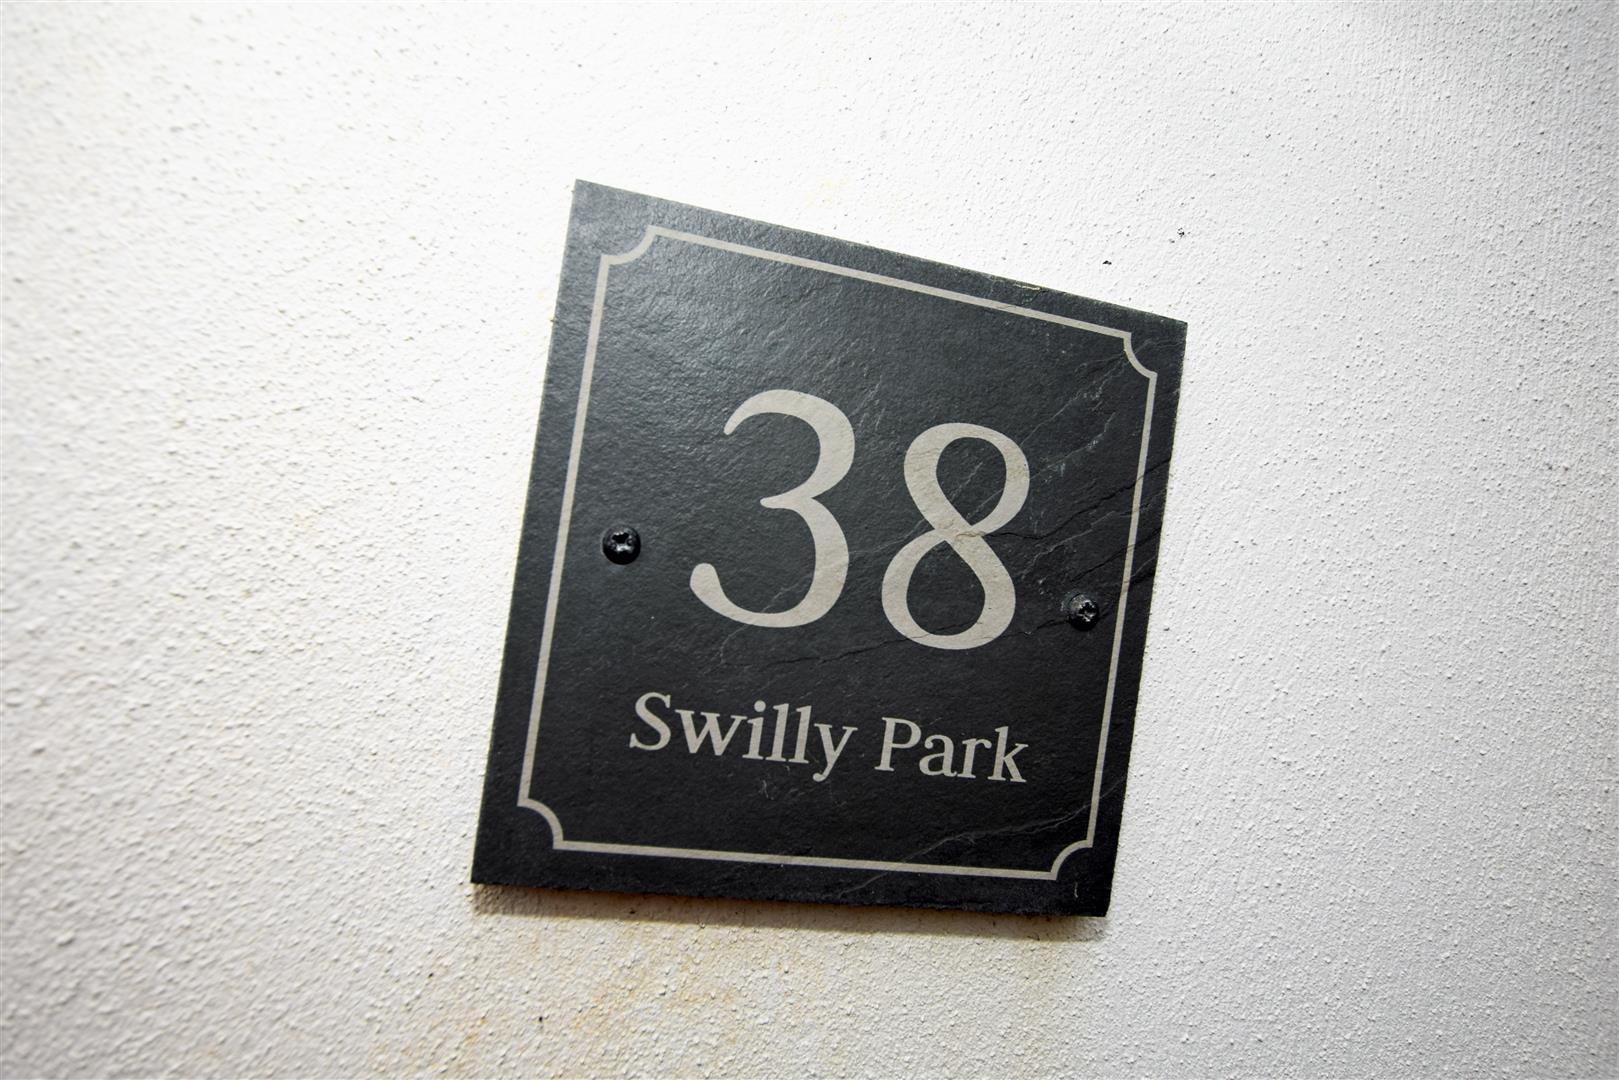 38 Swilly Park